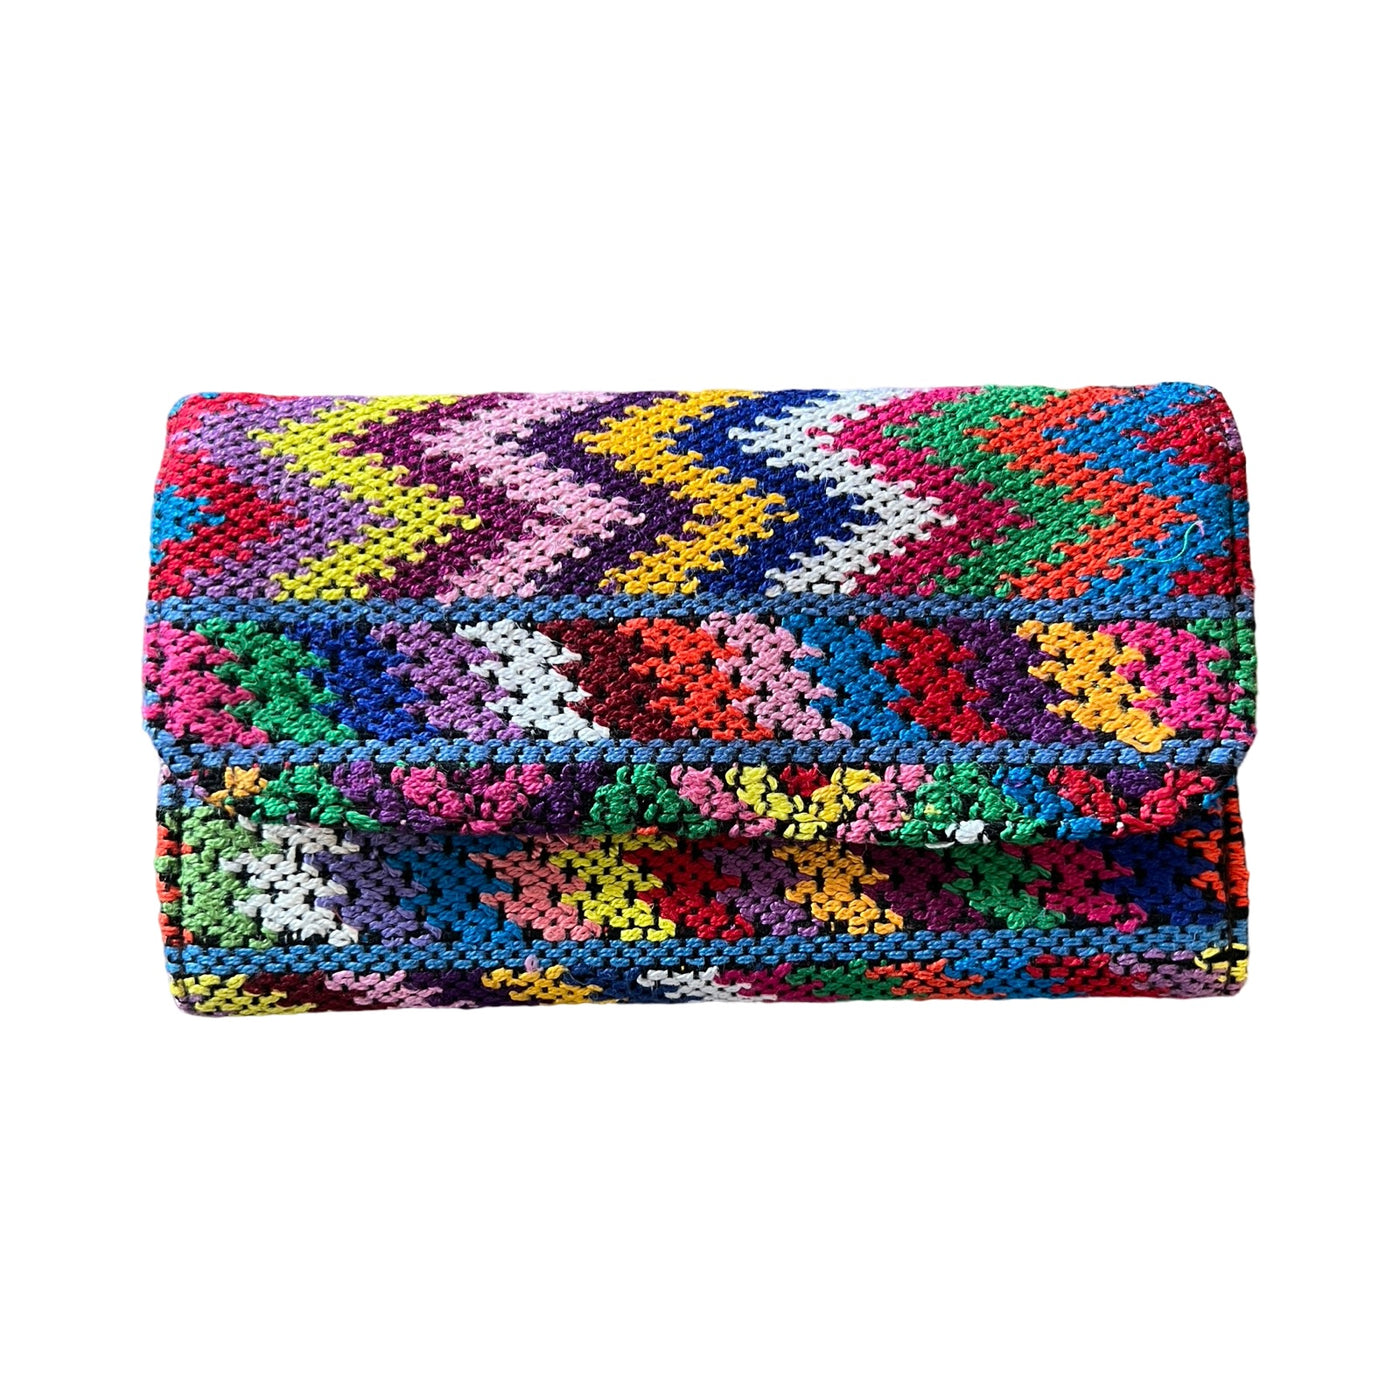 huipil wallet with a multi-color design of stripes and arrows.